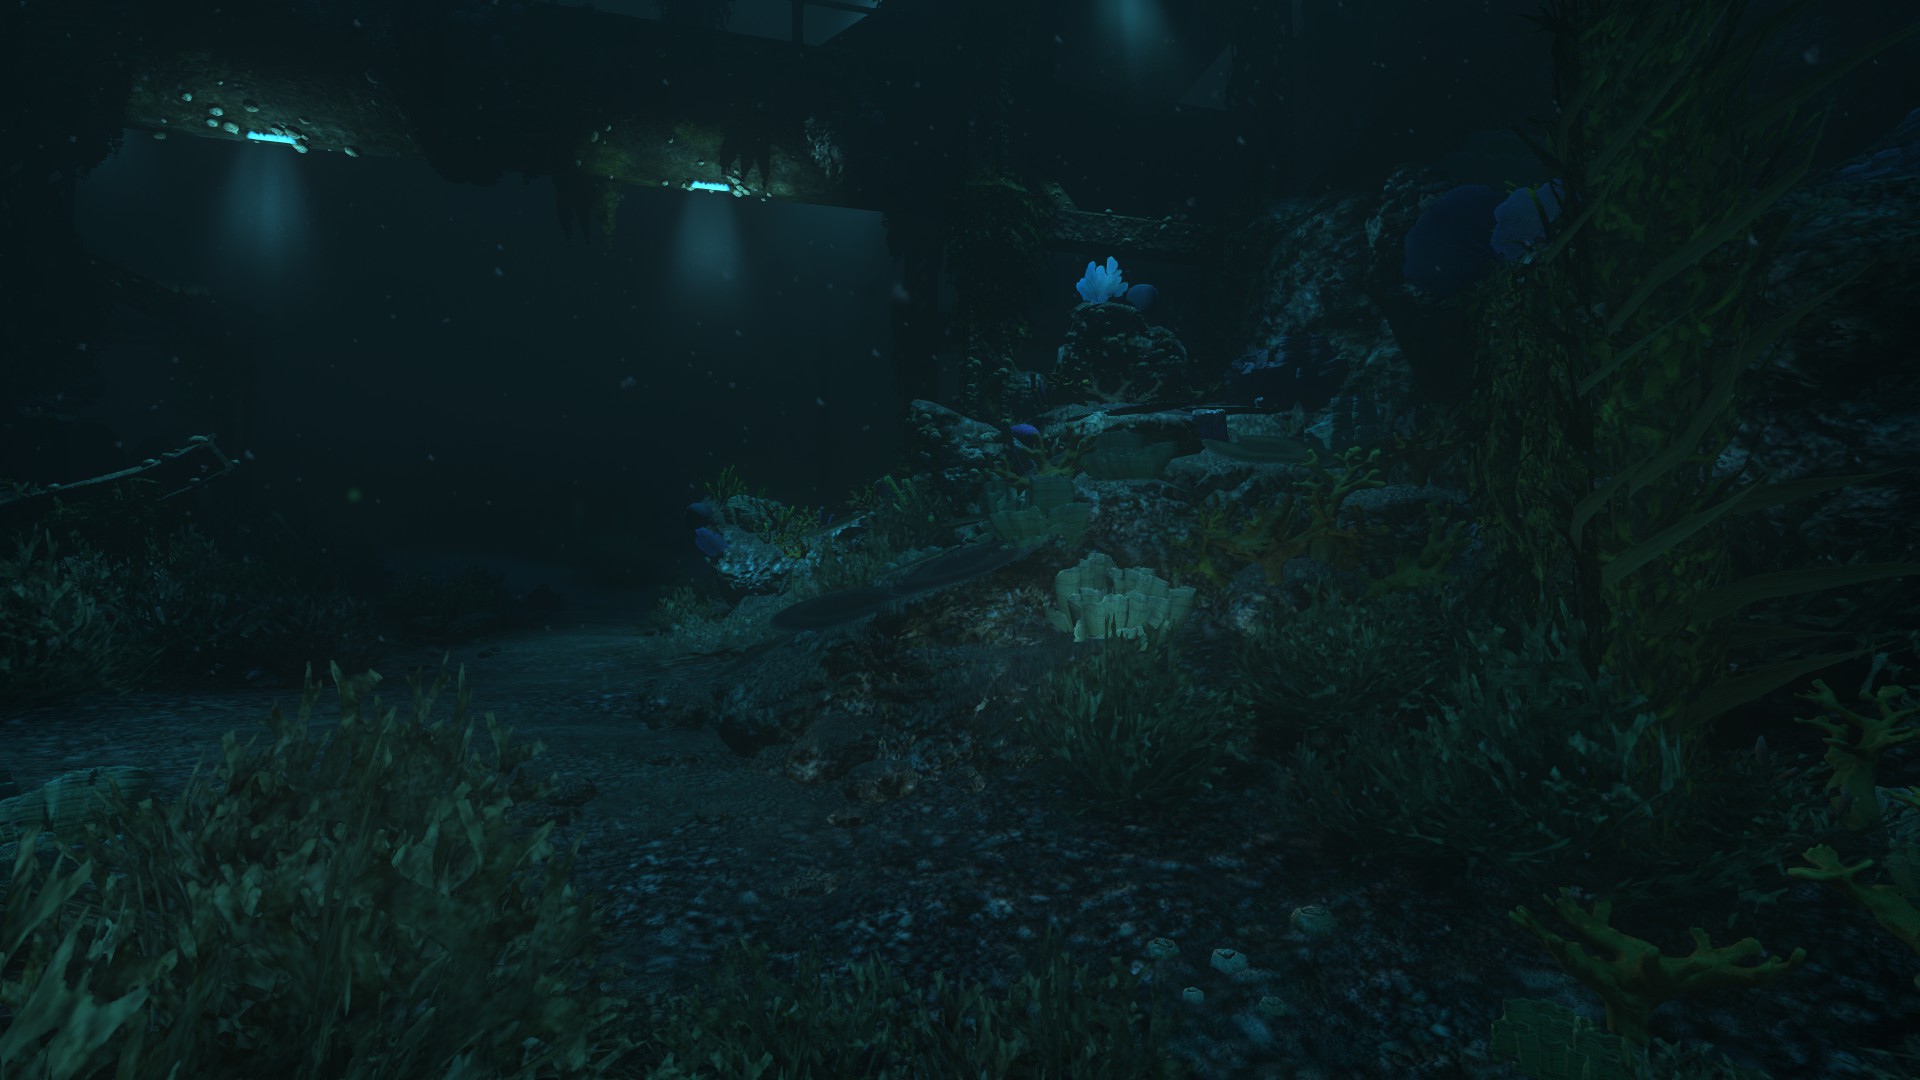 Exploring outside the underwater facility.